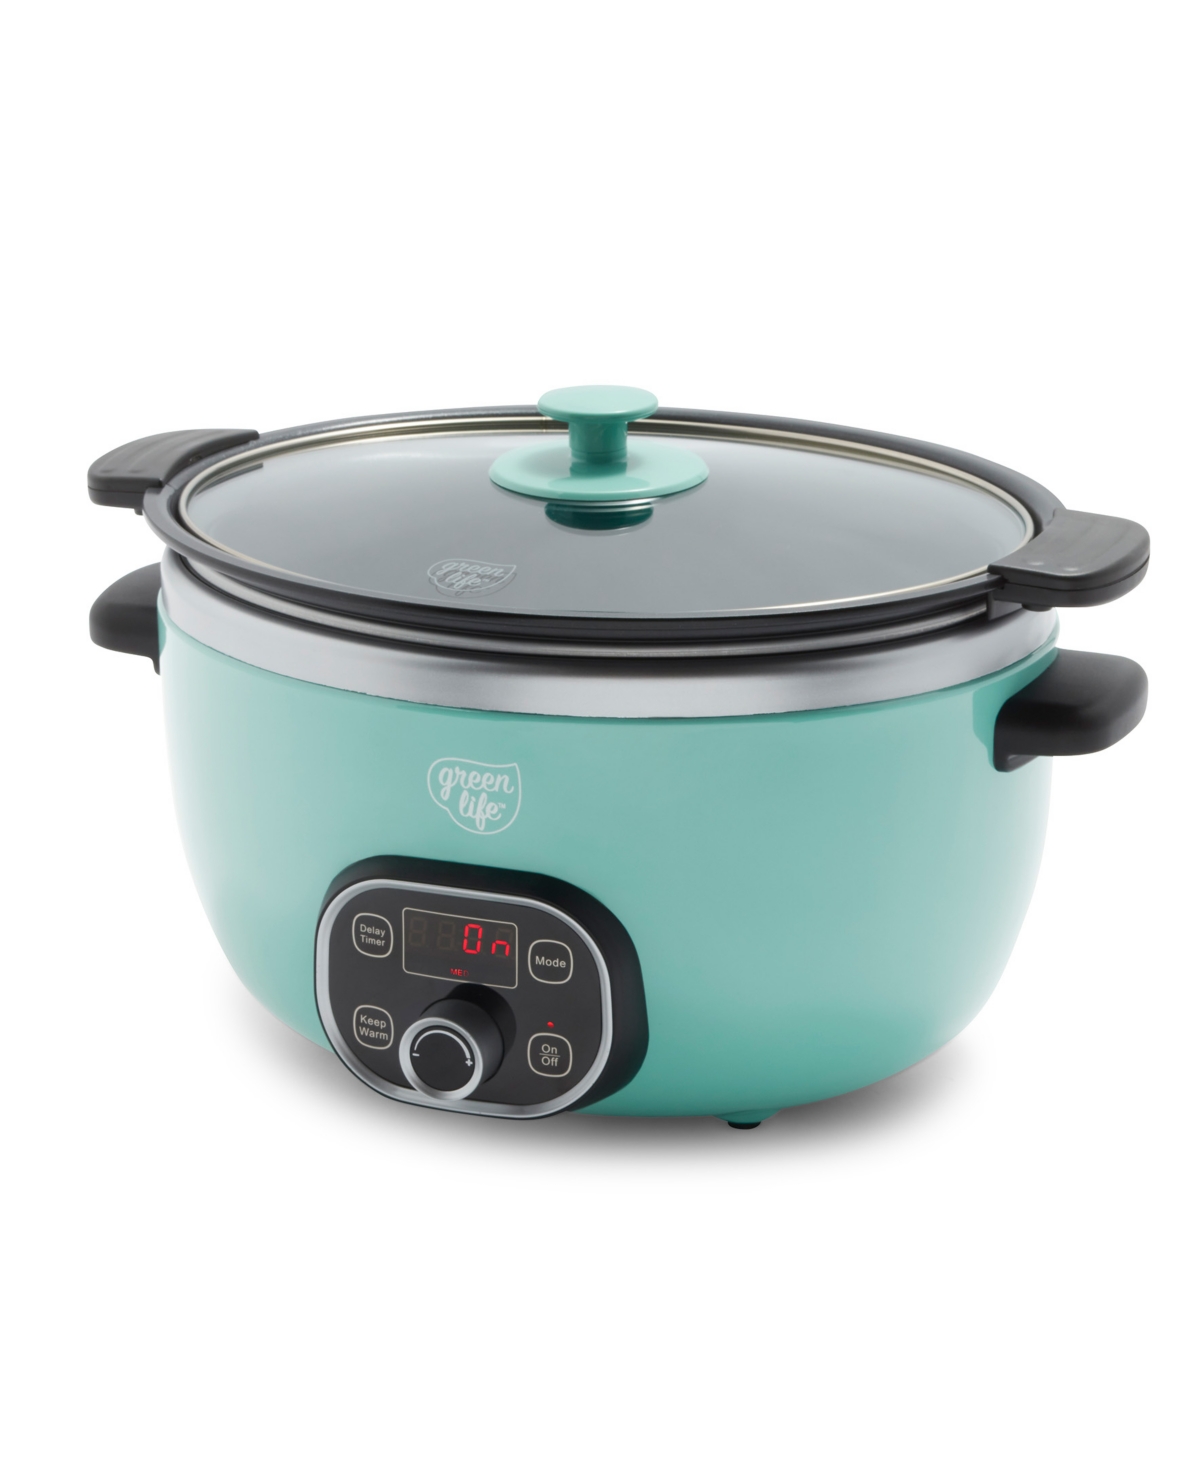 Greenlife Cook Duo Healthy 6qt Ceramic Nonstick Slow Cooker In Blue